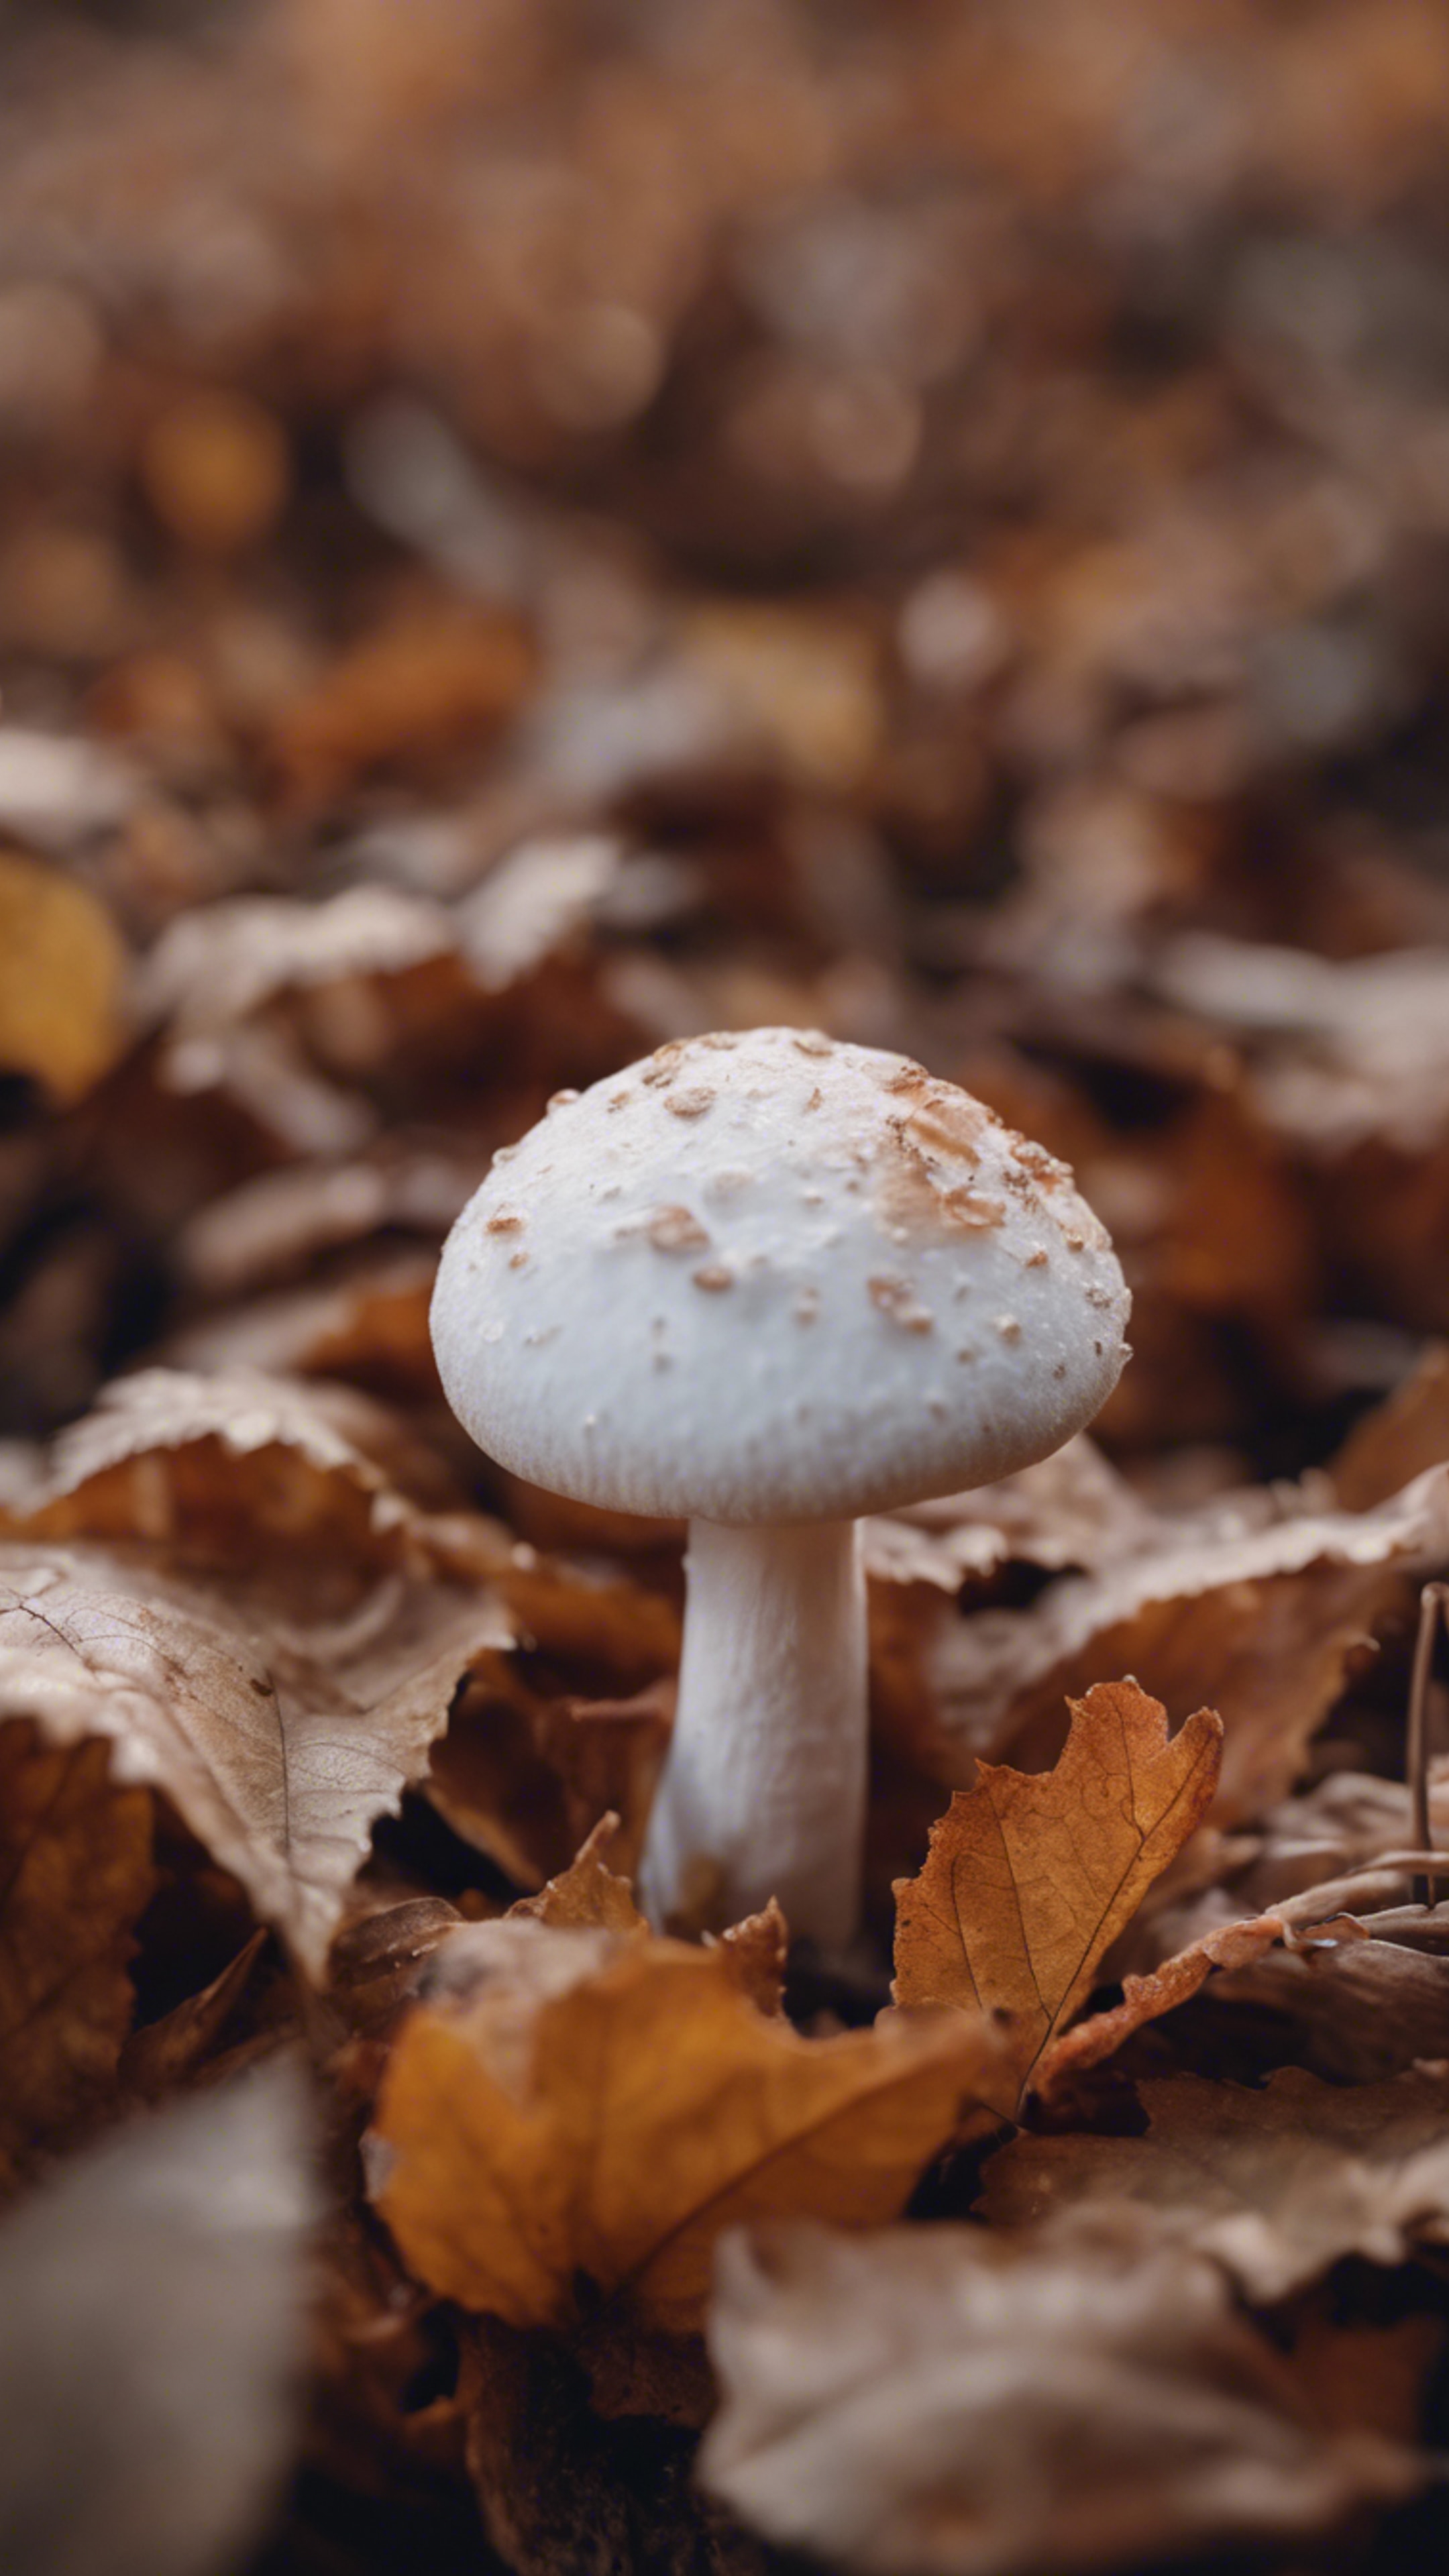 A cute mushroom with a puffy white cap and thin brown stem poking out from a pile of fresh, crisp autumn leaves.壁紙[388d0ec1753443b9a4b4]